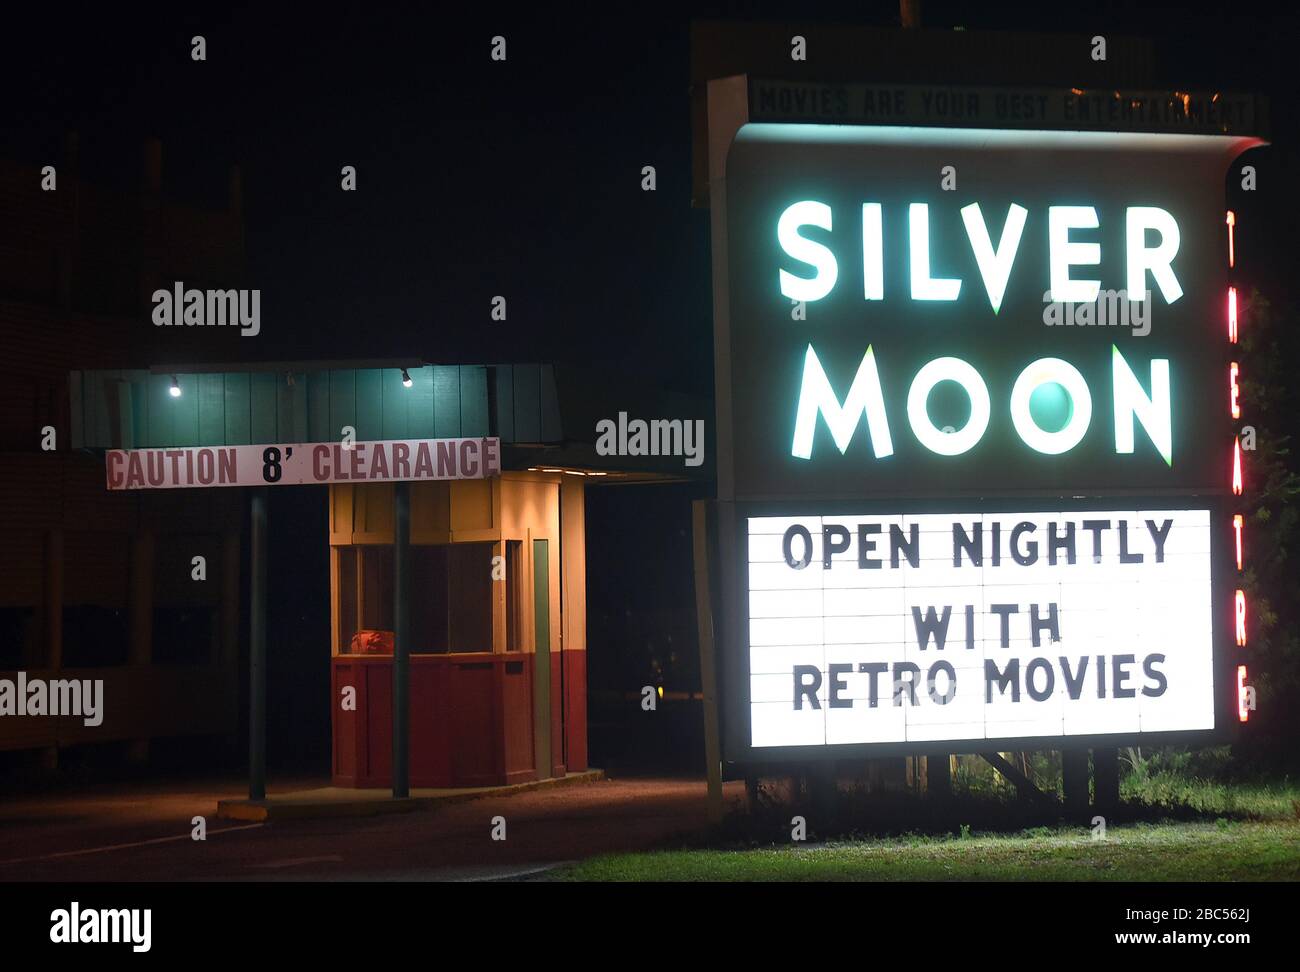 Lakeland, United States. 02nd Apr, 2020. April 2, 2020 - Lakeland, Florida, United States - The entrance to the Silver Moon drive-in theatre in Lakeland, Florida is seen on April 2, 2020, the last night of operation before the state-wide stay-at-home order issued by Florida Governor Ron DeSantis to curb the spread of coronavirus takes effect. The two-screen Silver Moon, the last remaining drive-in of Polk County, Florida, has seen an increase in business since the COVID-19 pandemic forced the closure of indoor theaters. Credit: Paul Hennessy/Alamy Live News Stock Photo